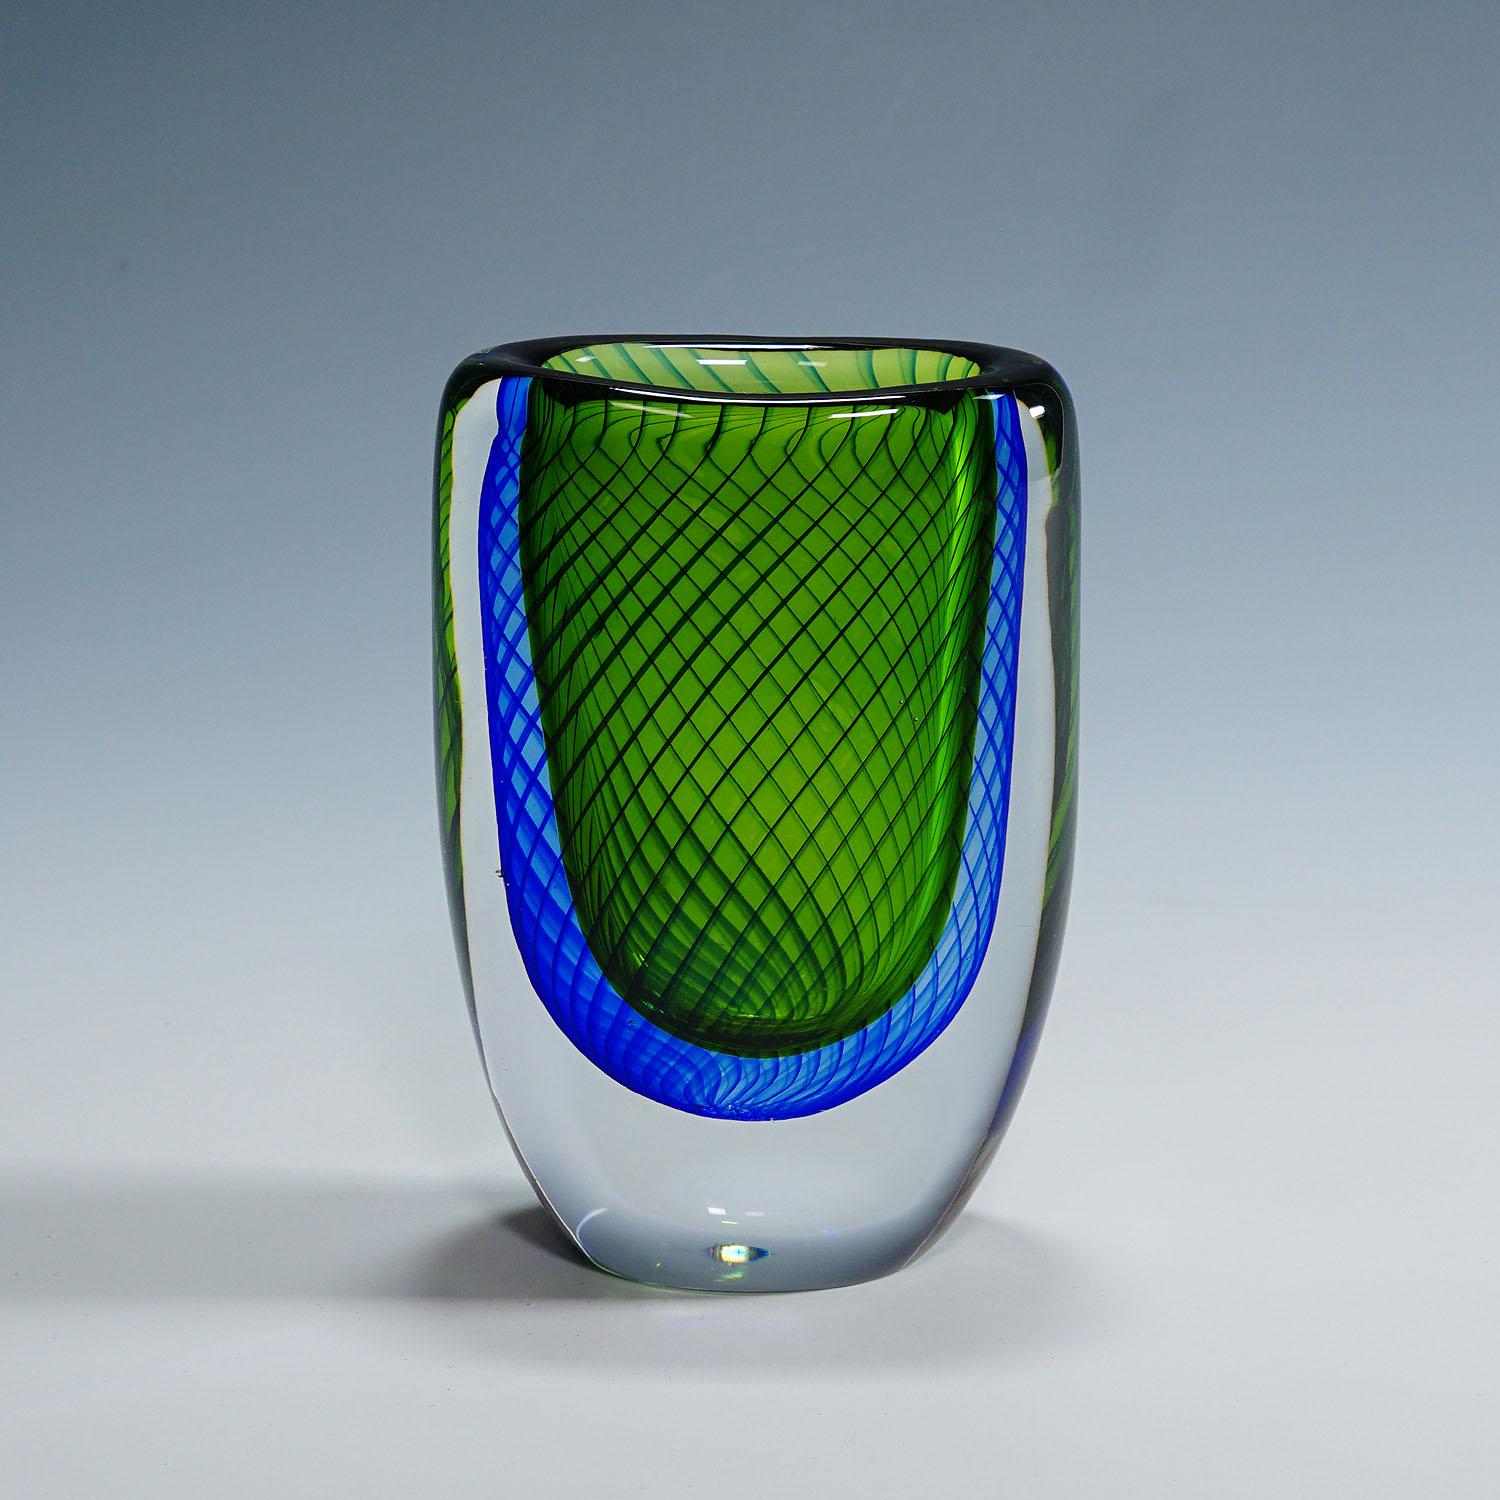 Vase with Blue and Green Layers, Vicke Lindstrand for Kosta 1950s

A vintage art glass vase designed by Vicke Lindstrand and manufactured by Kosta Glasbruk ca. 1950s. The vase features blue and a green glass layers with clear glass overlay and a